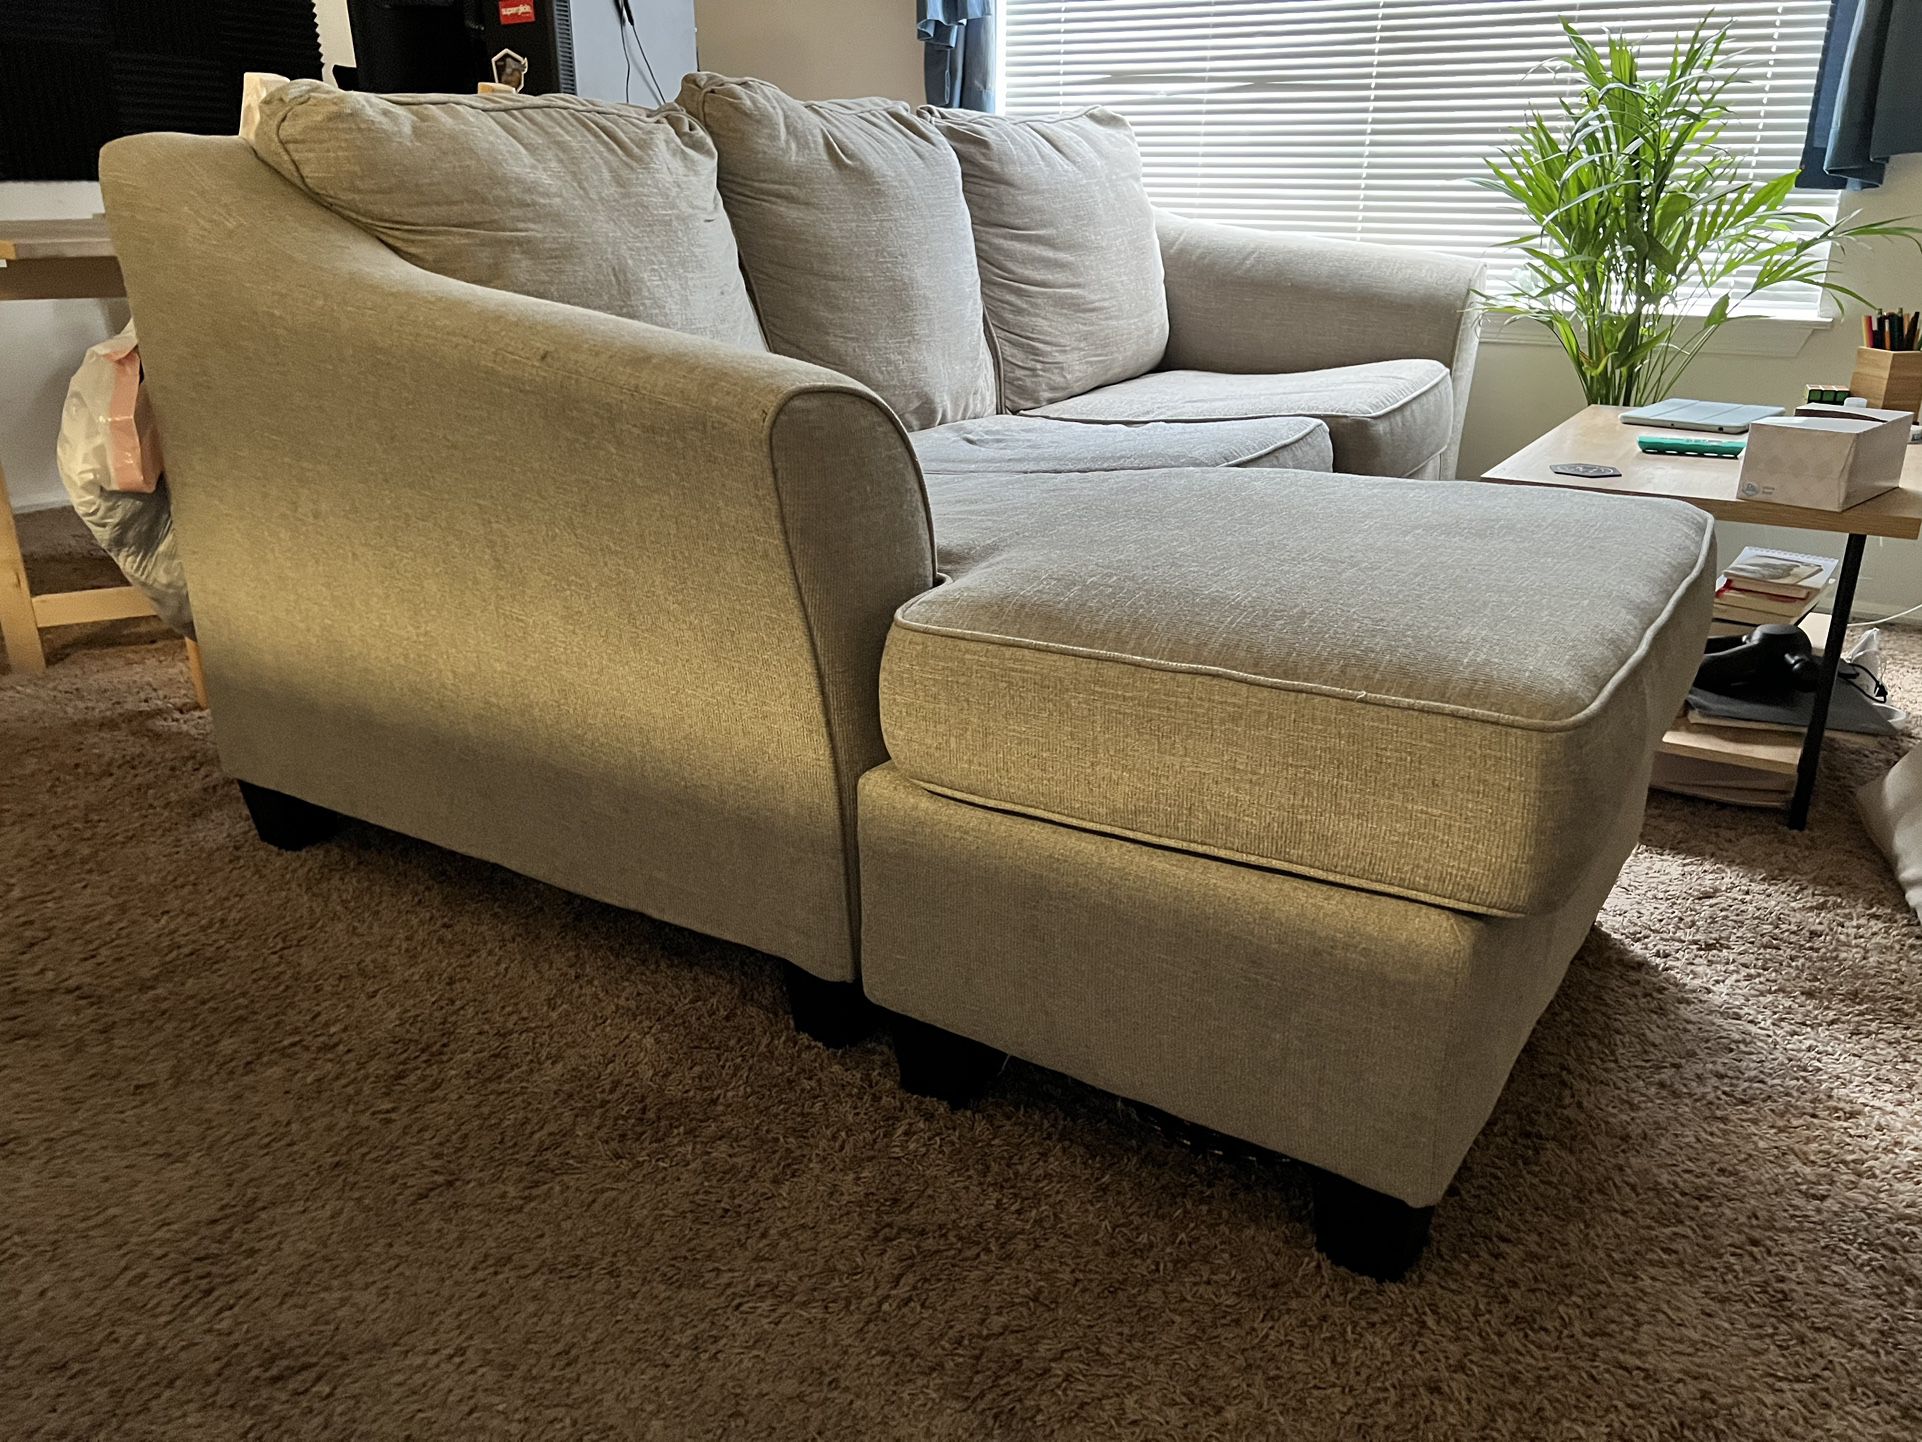 Fold Out couch